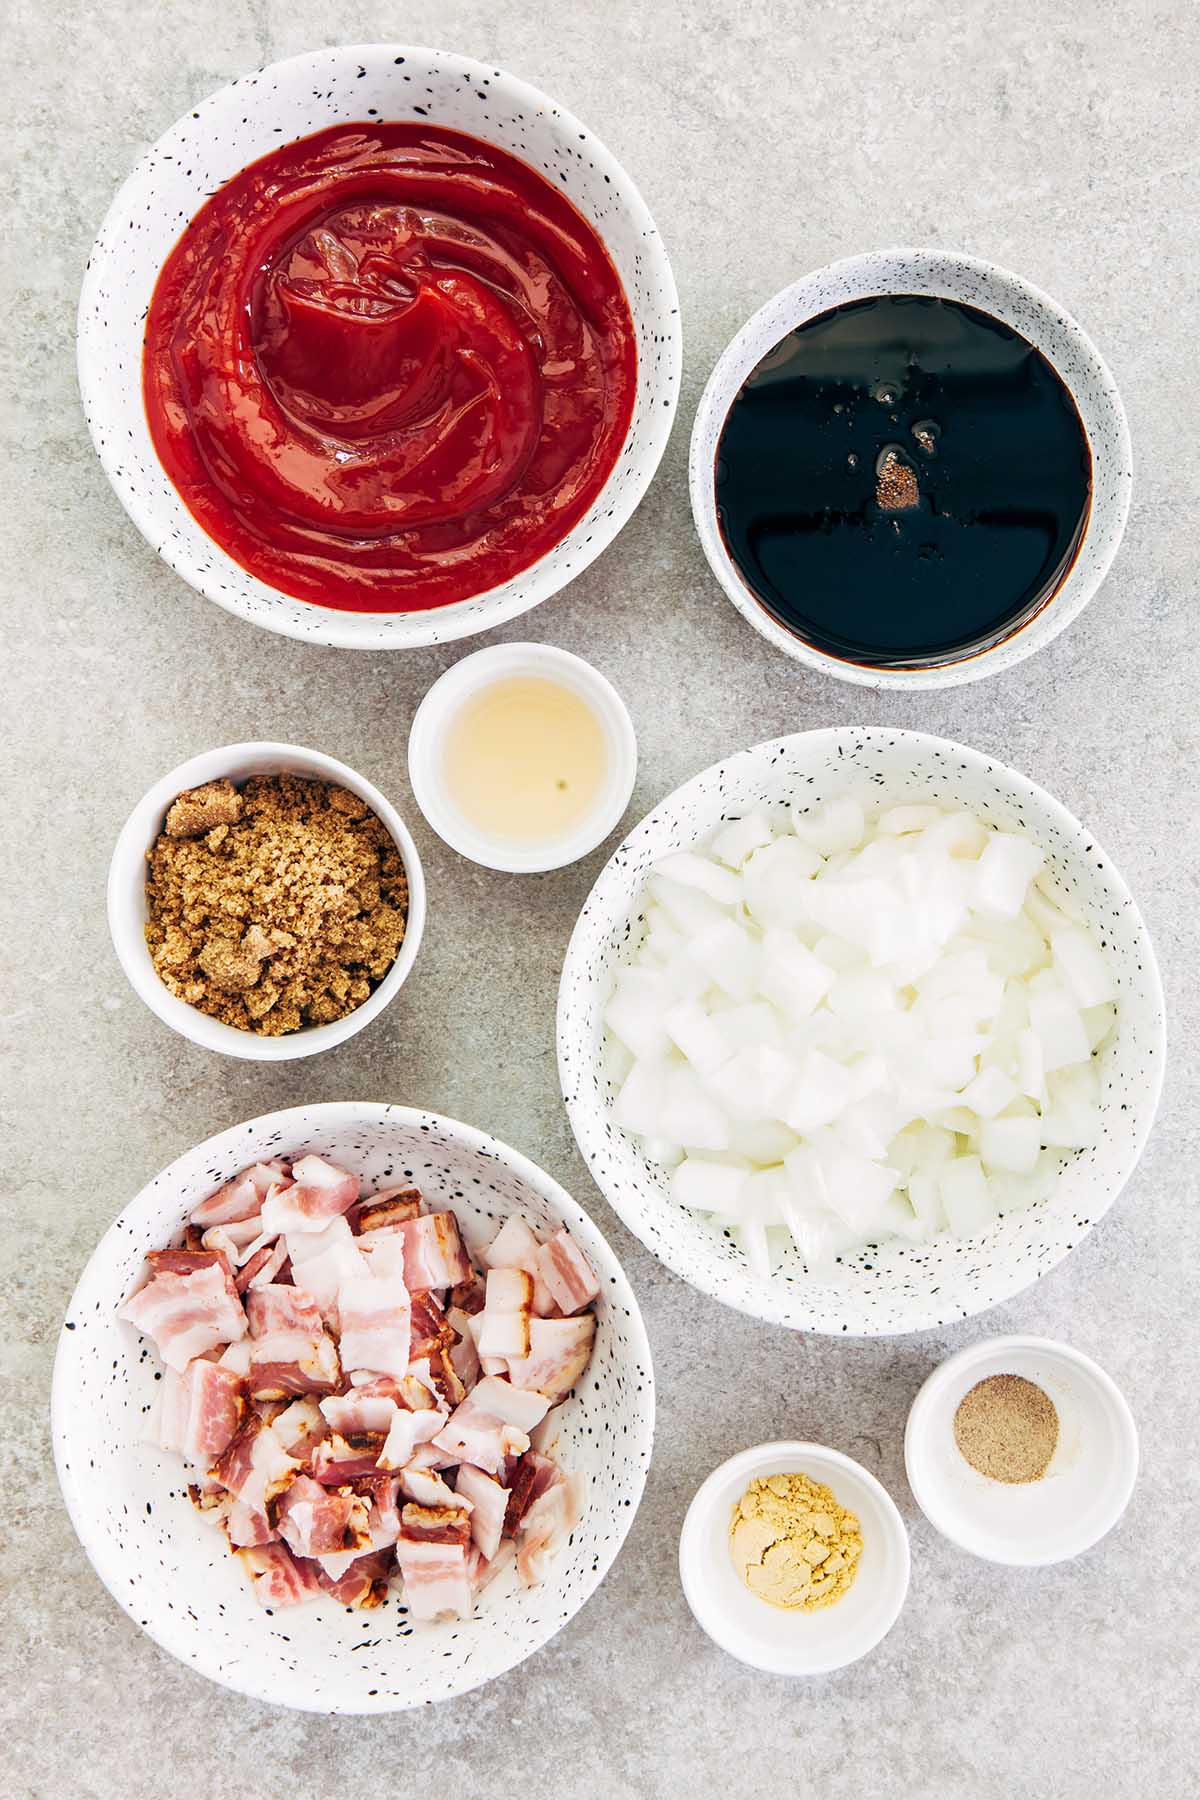 Bowls of ketchup, molasses, apple cider vinegar, brown sugar, chopped onion and bacon, ground mustard, and ground pepper on a stone surface.